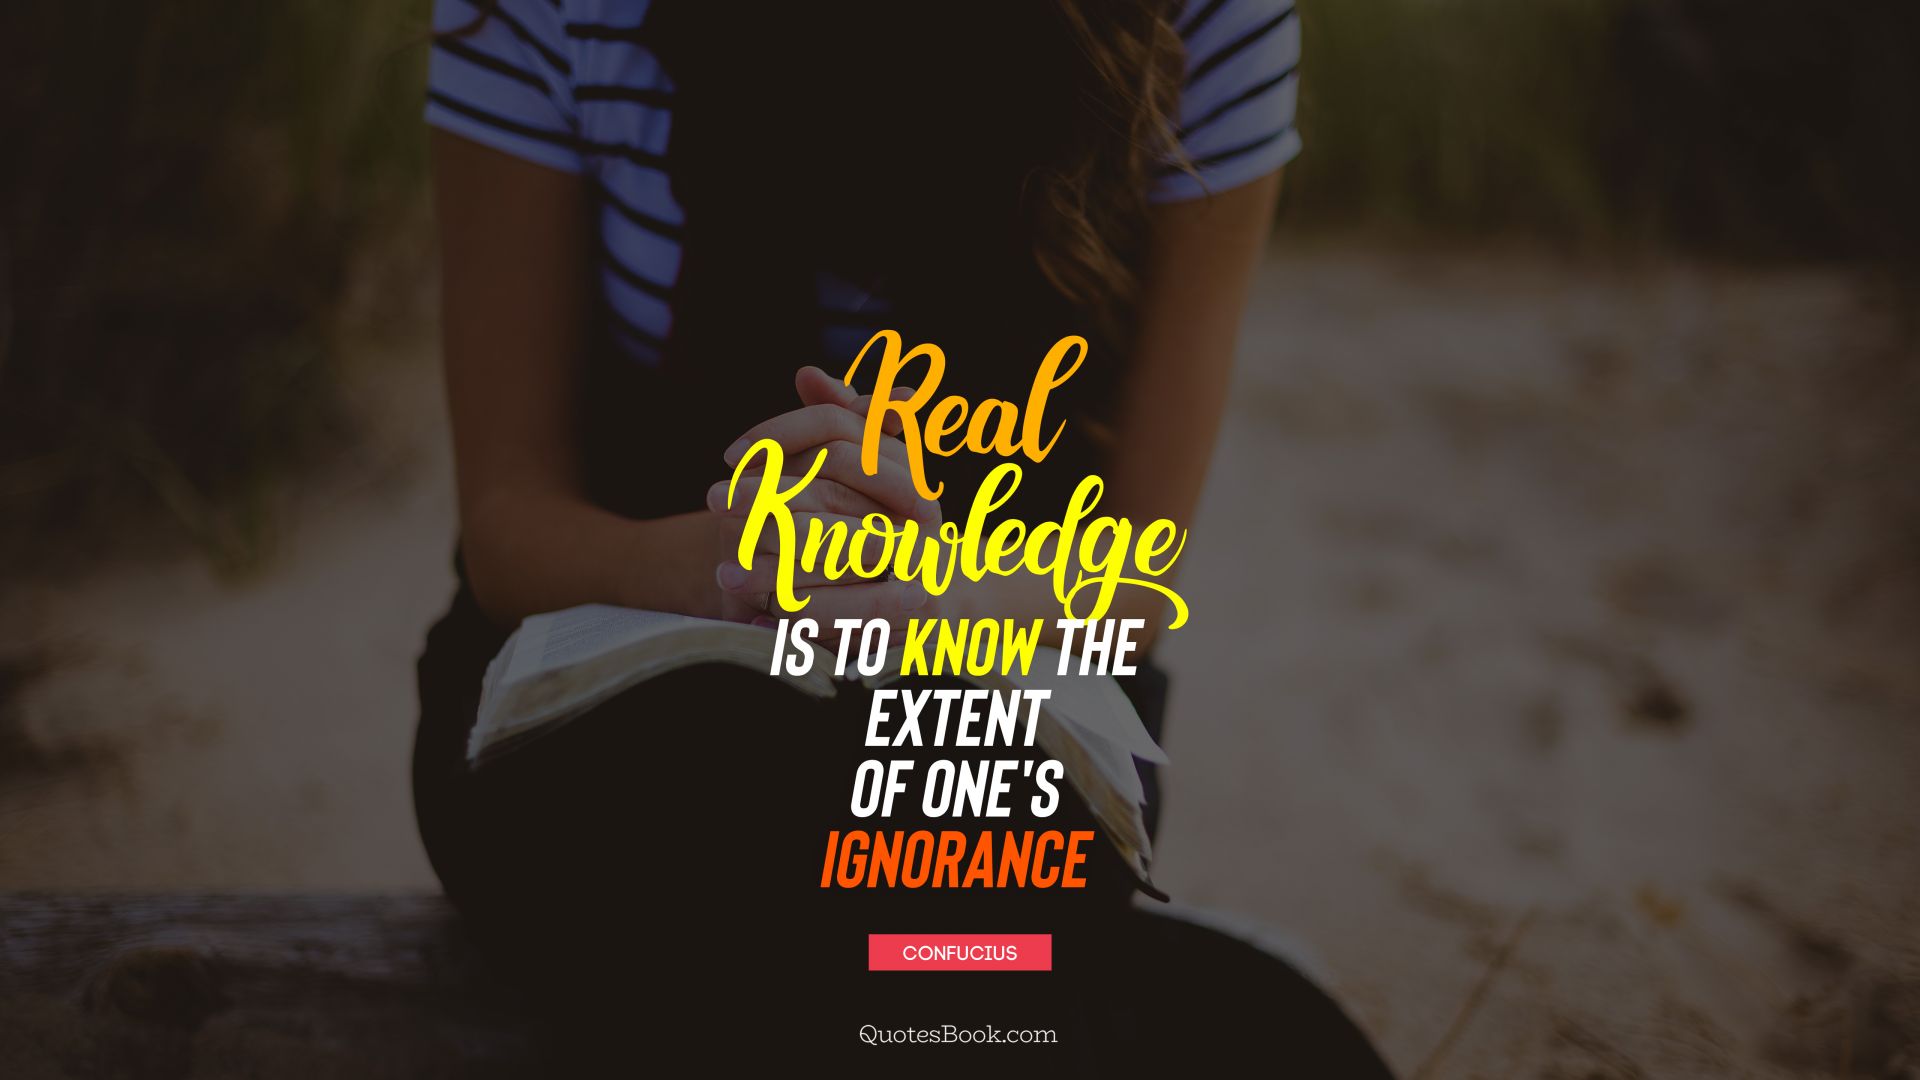 Real knowledge is to know the extent of one's ignorance. - Quote by Confucius